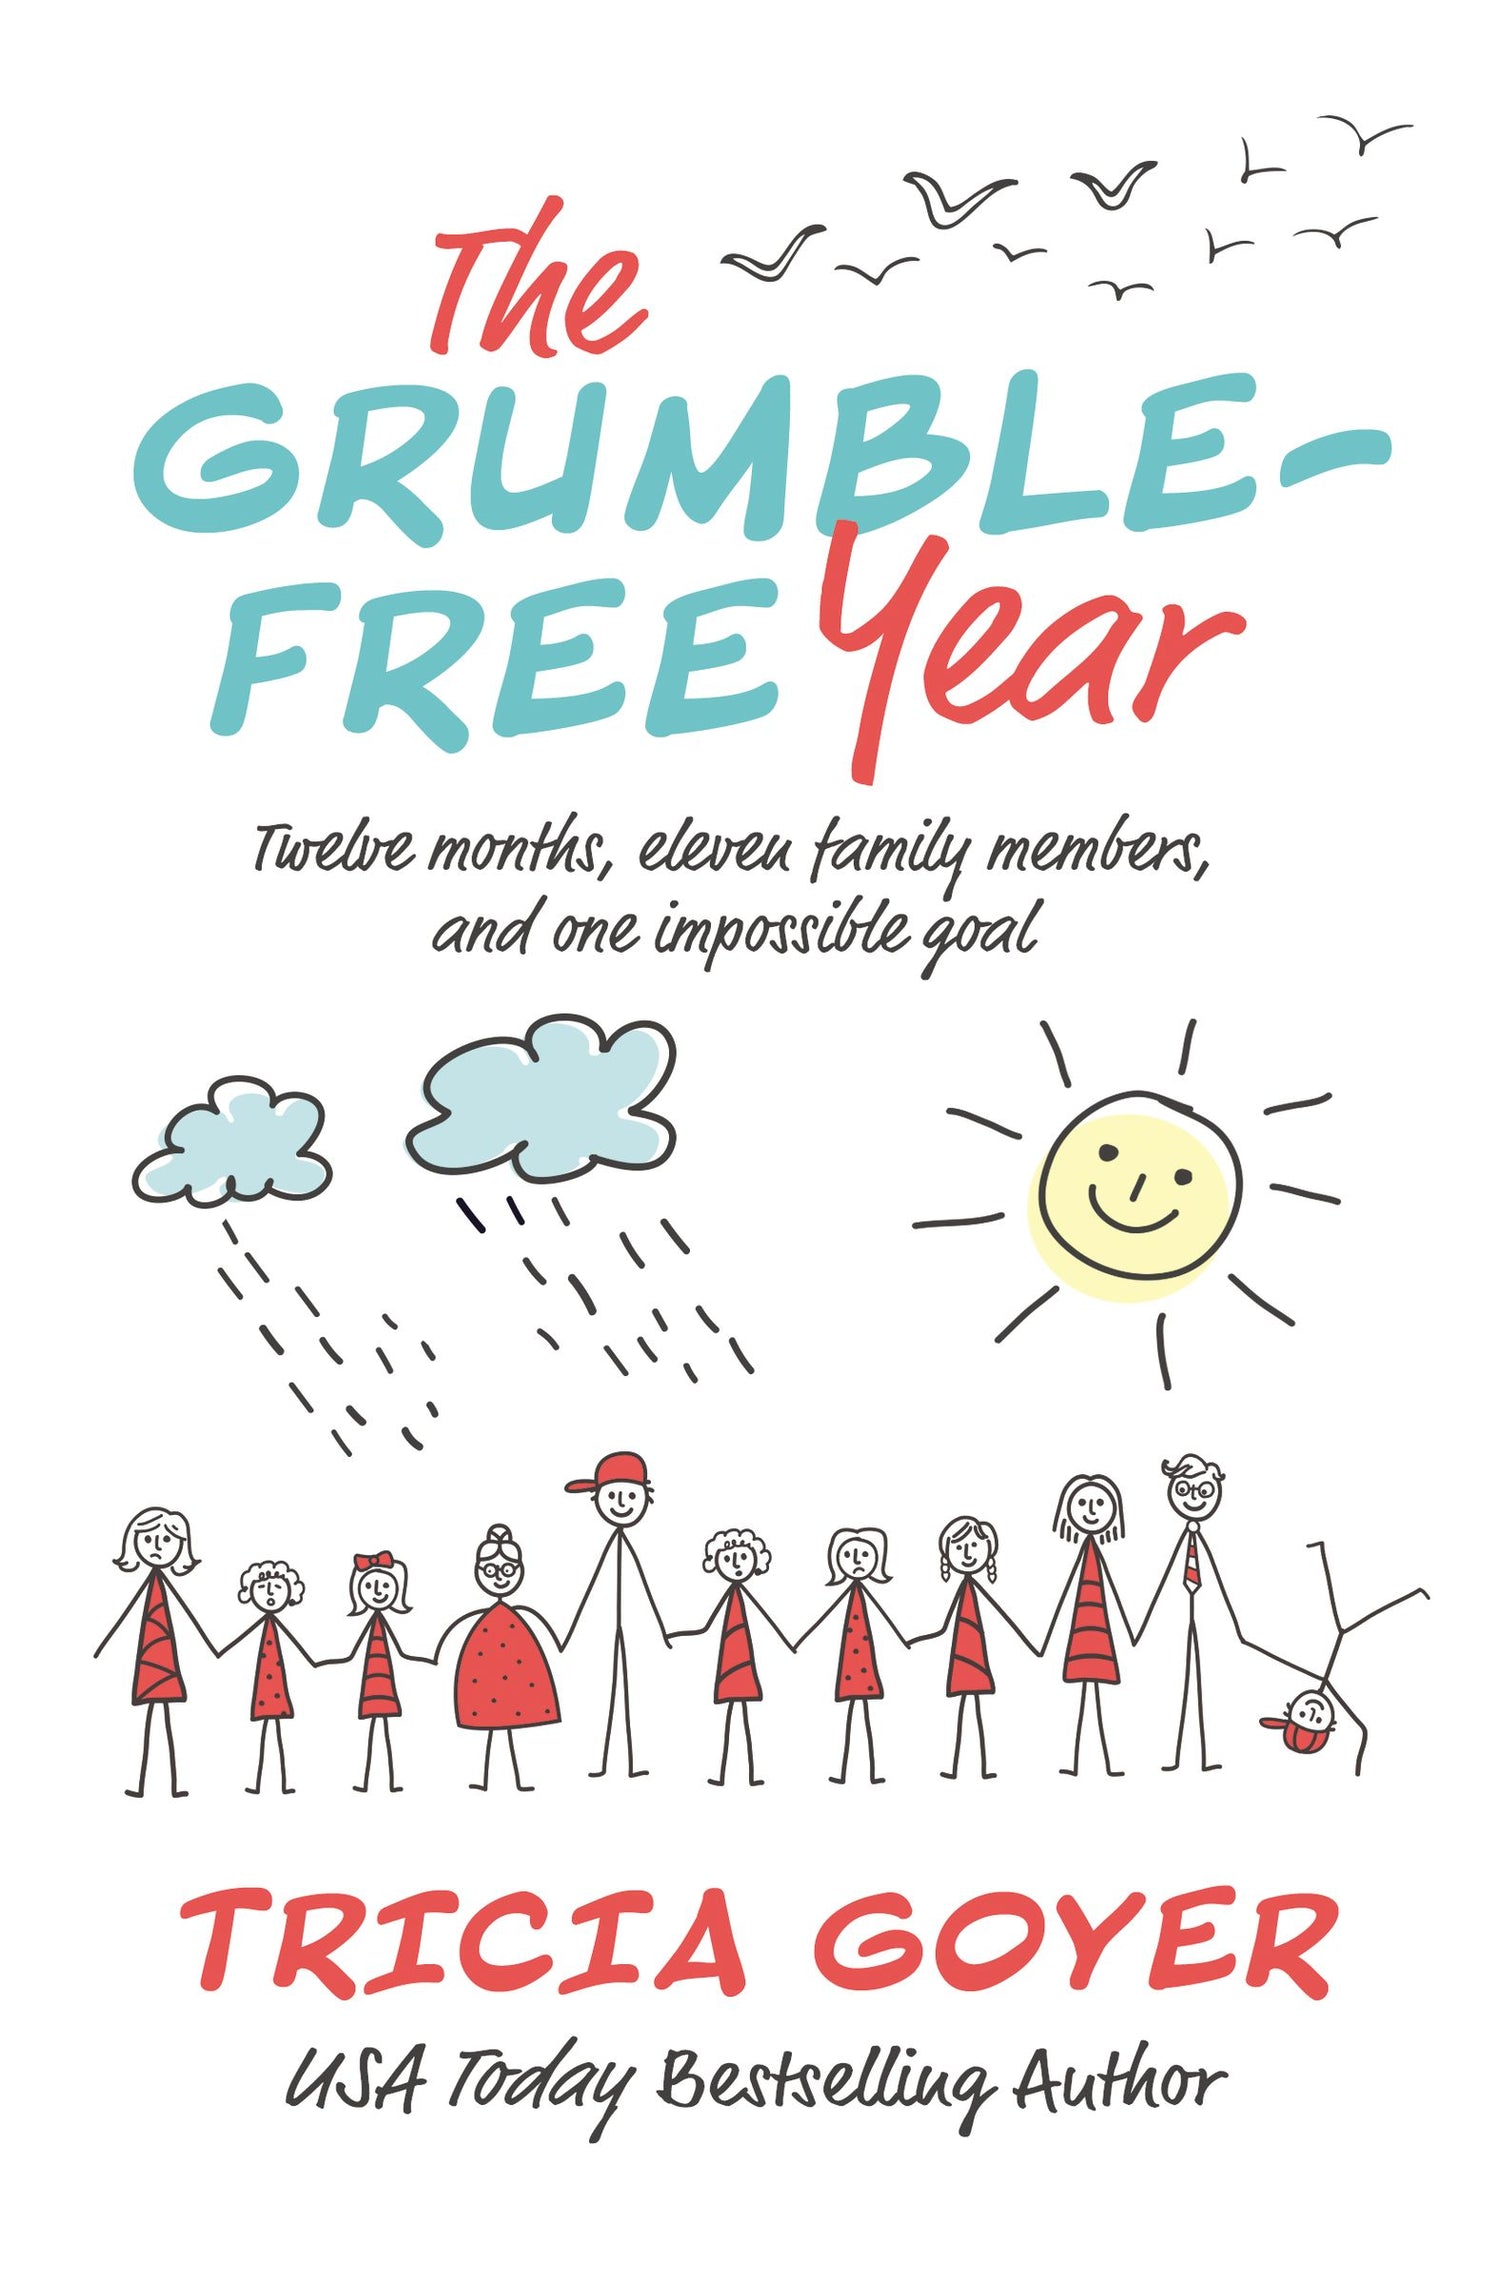 The Grumble-Free Year by Tricia Goyer